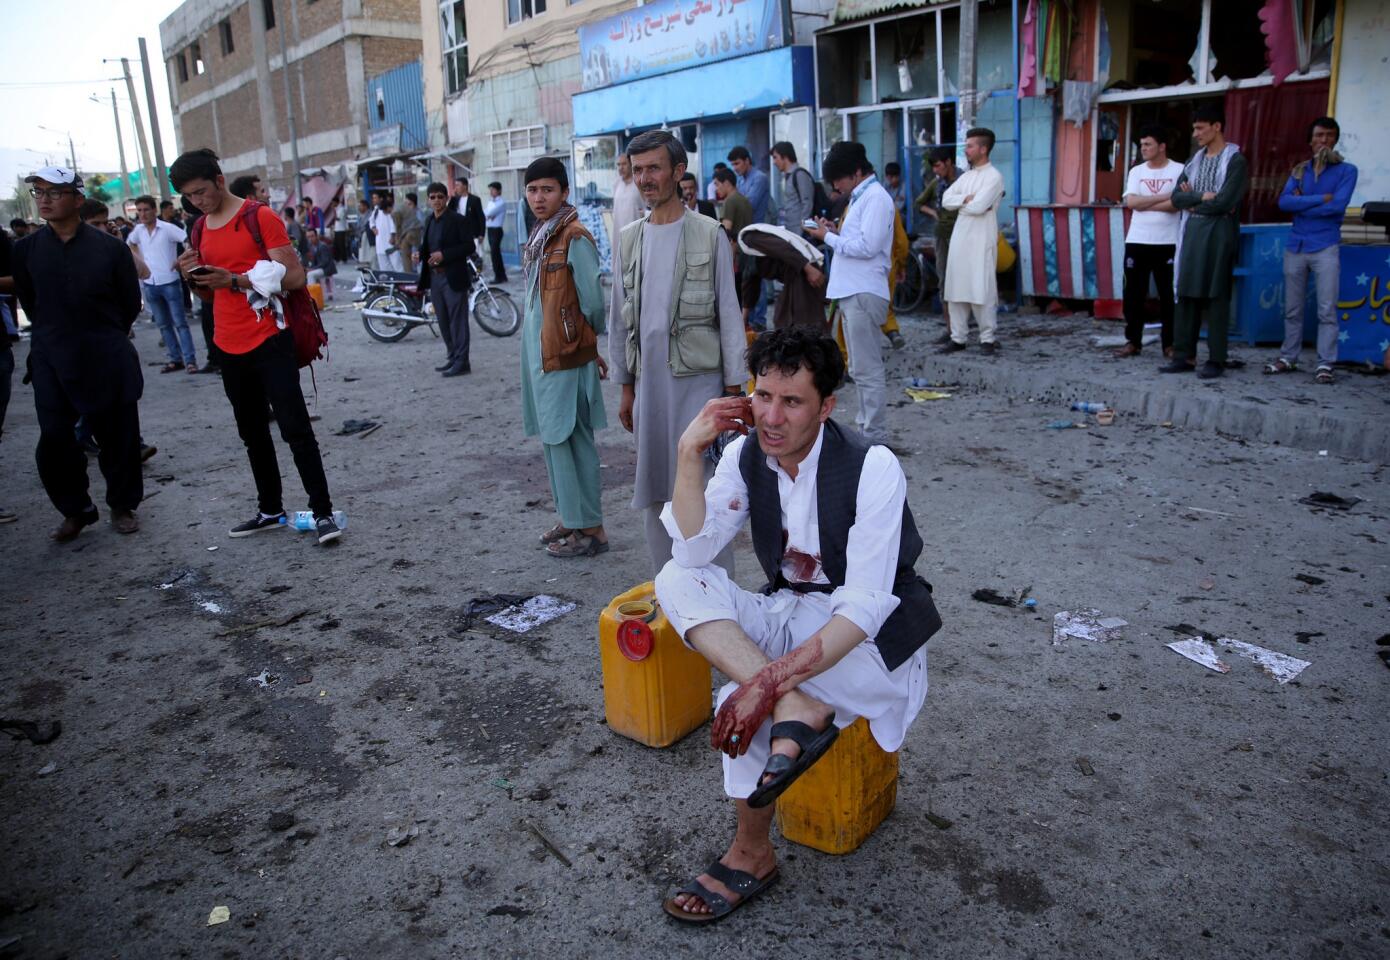 Islamic State blasts peaceful protest in Kabul